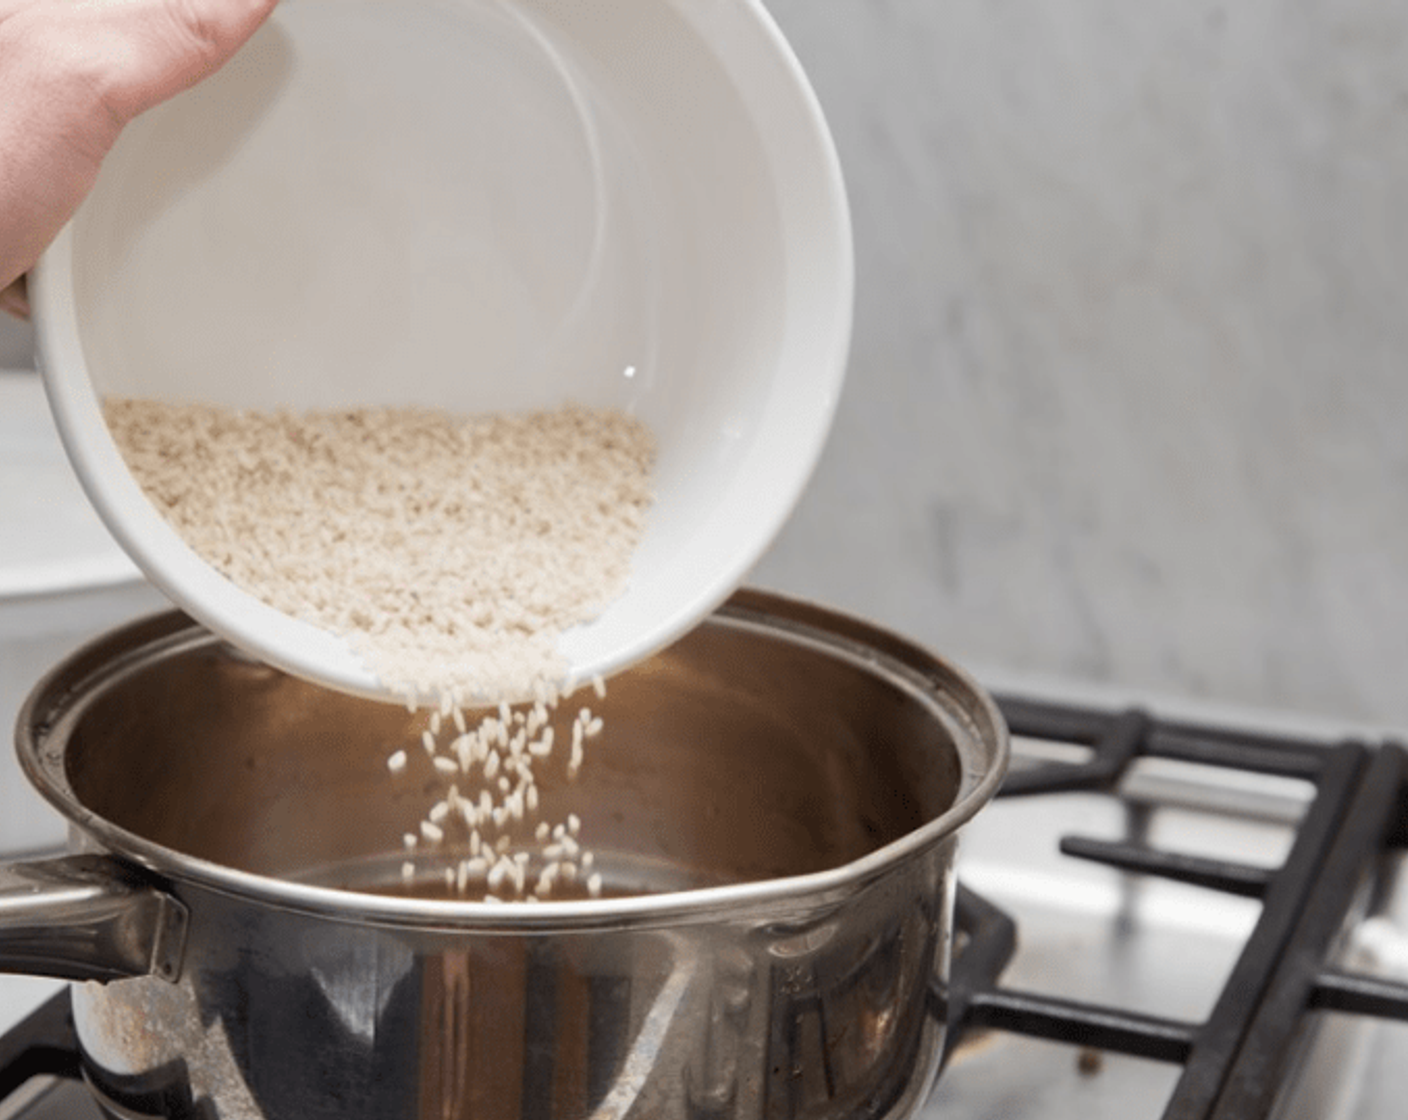 step 1 In a small saucepan with a lid, combine Carolina Gold Rice (to taste), Water (1 1/4 cups) and Salt (1/2 tsp). Place over high heat. When water begins to simmer, reduce heat to low, cover and cook 15-20 minutes, or until water is absorbed.